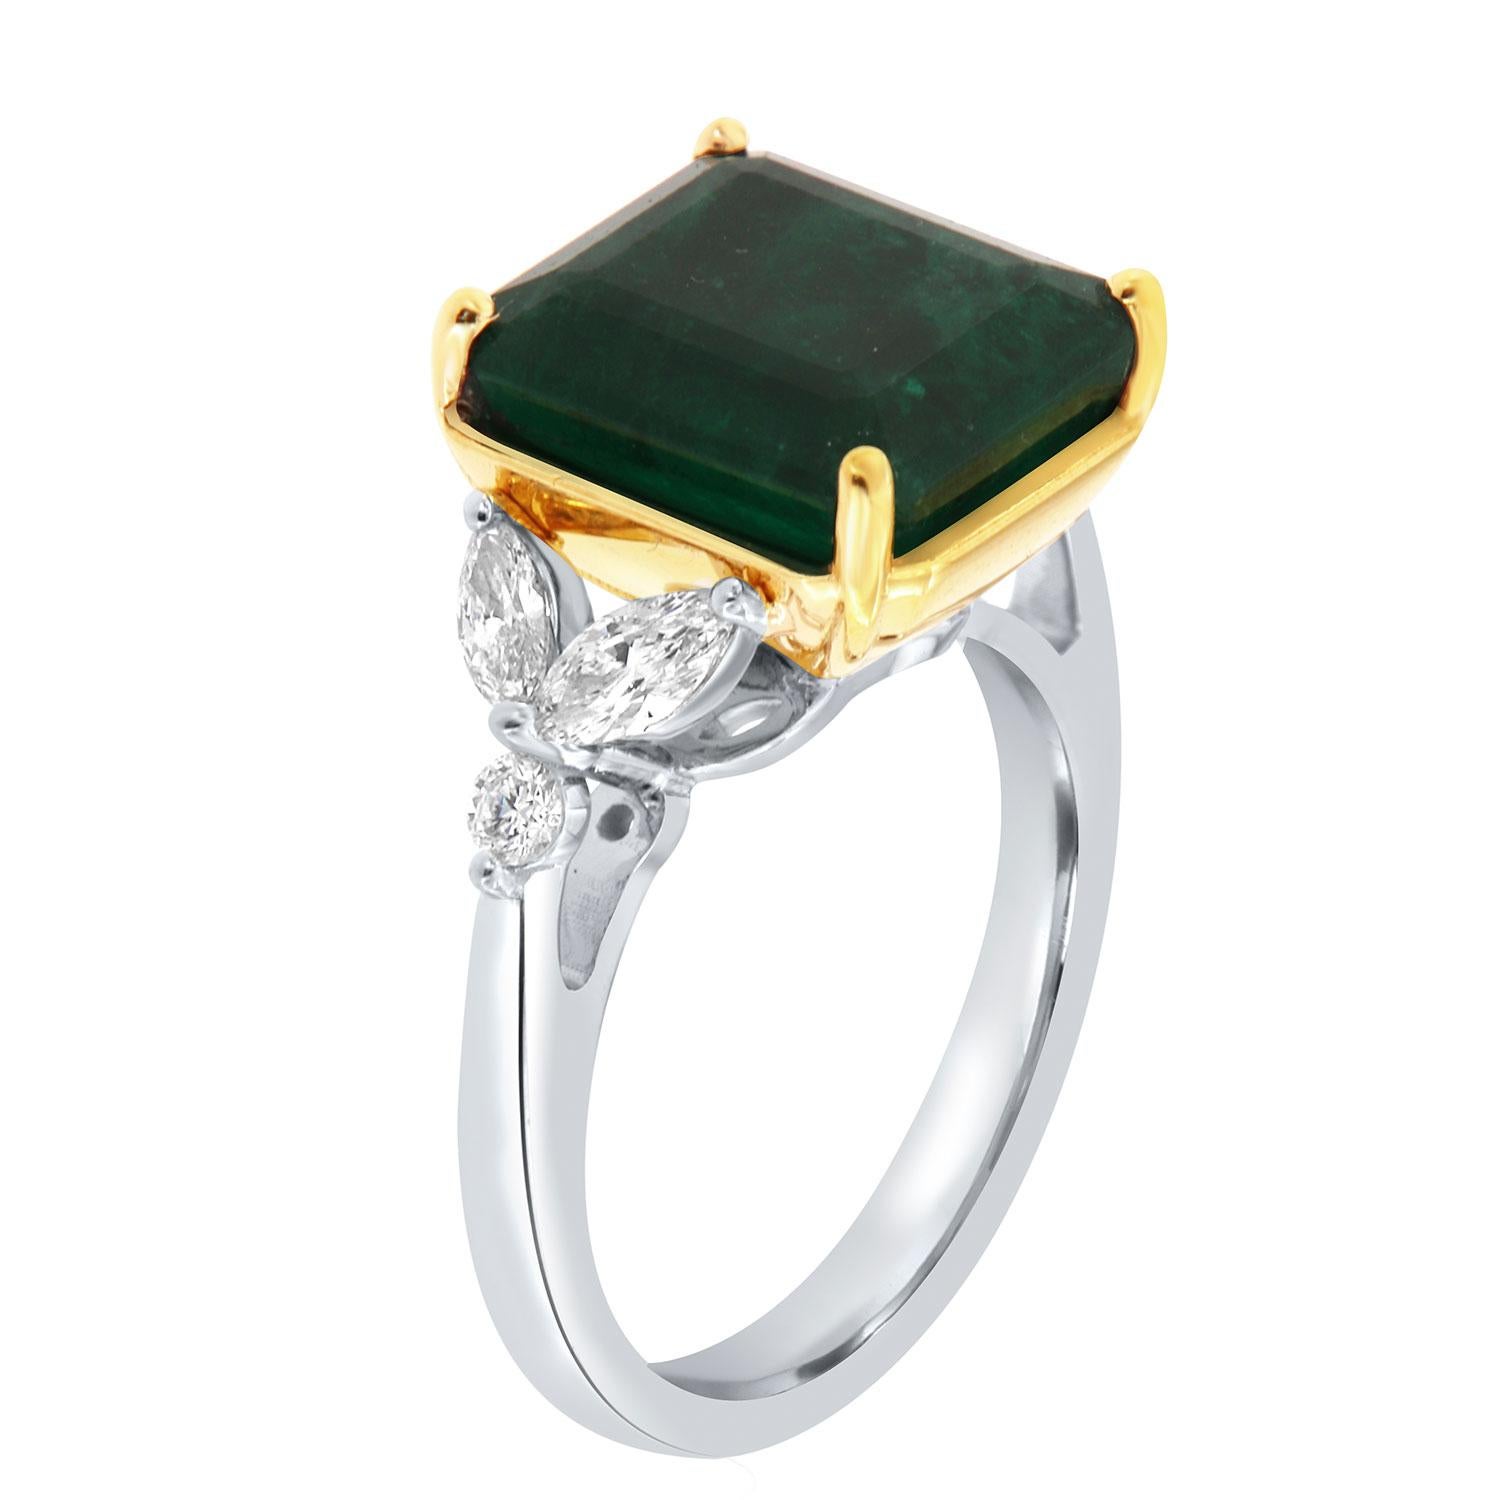 This stunning Platinum and 18k yellow gold ring feature a 6.53 Carat Emerald cut deep green Natural Emerald flanked by two (2) Marquees shape and one(1) Round shaped diamond on each side in a total weight of 0.58 Carat on a 2.4 mm wide band.
This